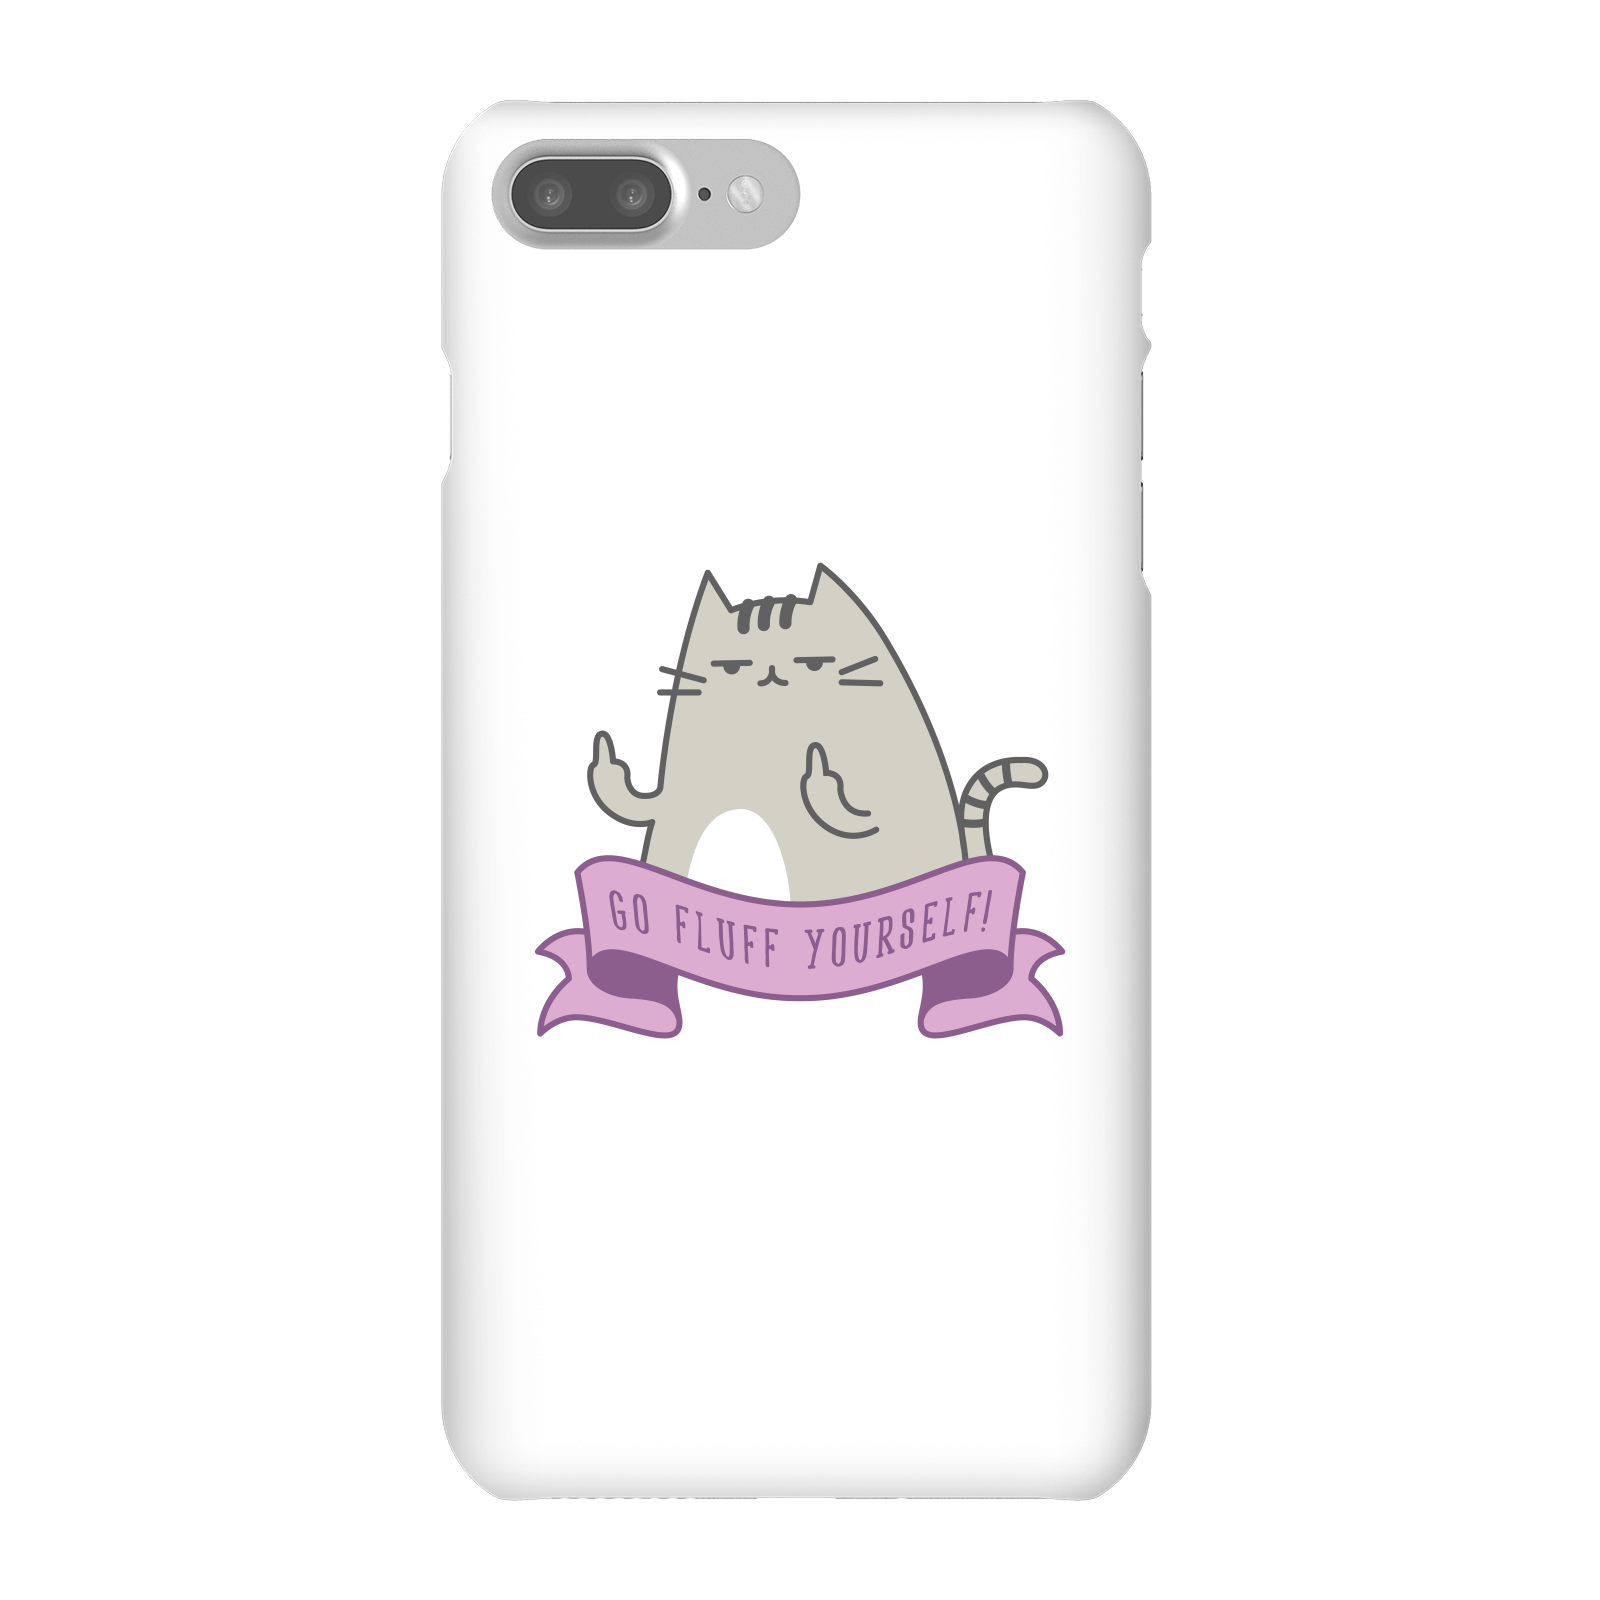 Go Fluff Yourself! Phone Case for iPhone and Android - iPhone 7 Plus - Snap Case - Matte